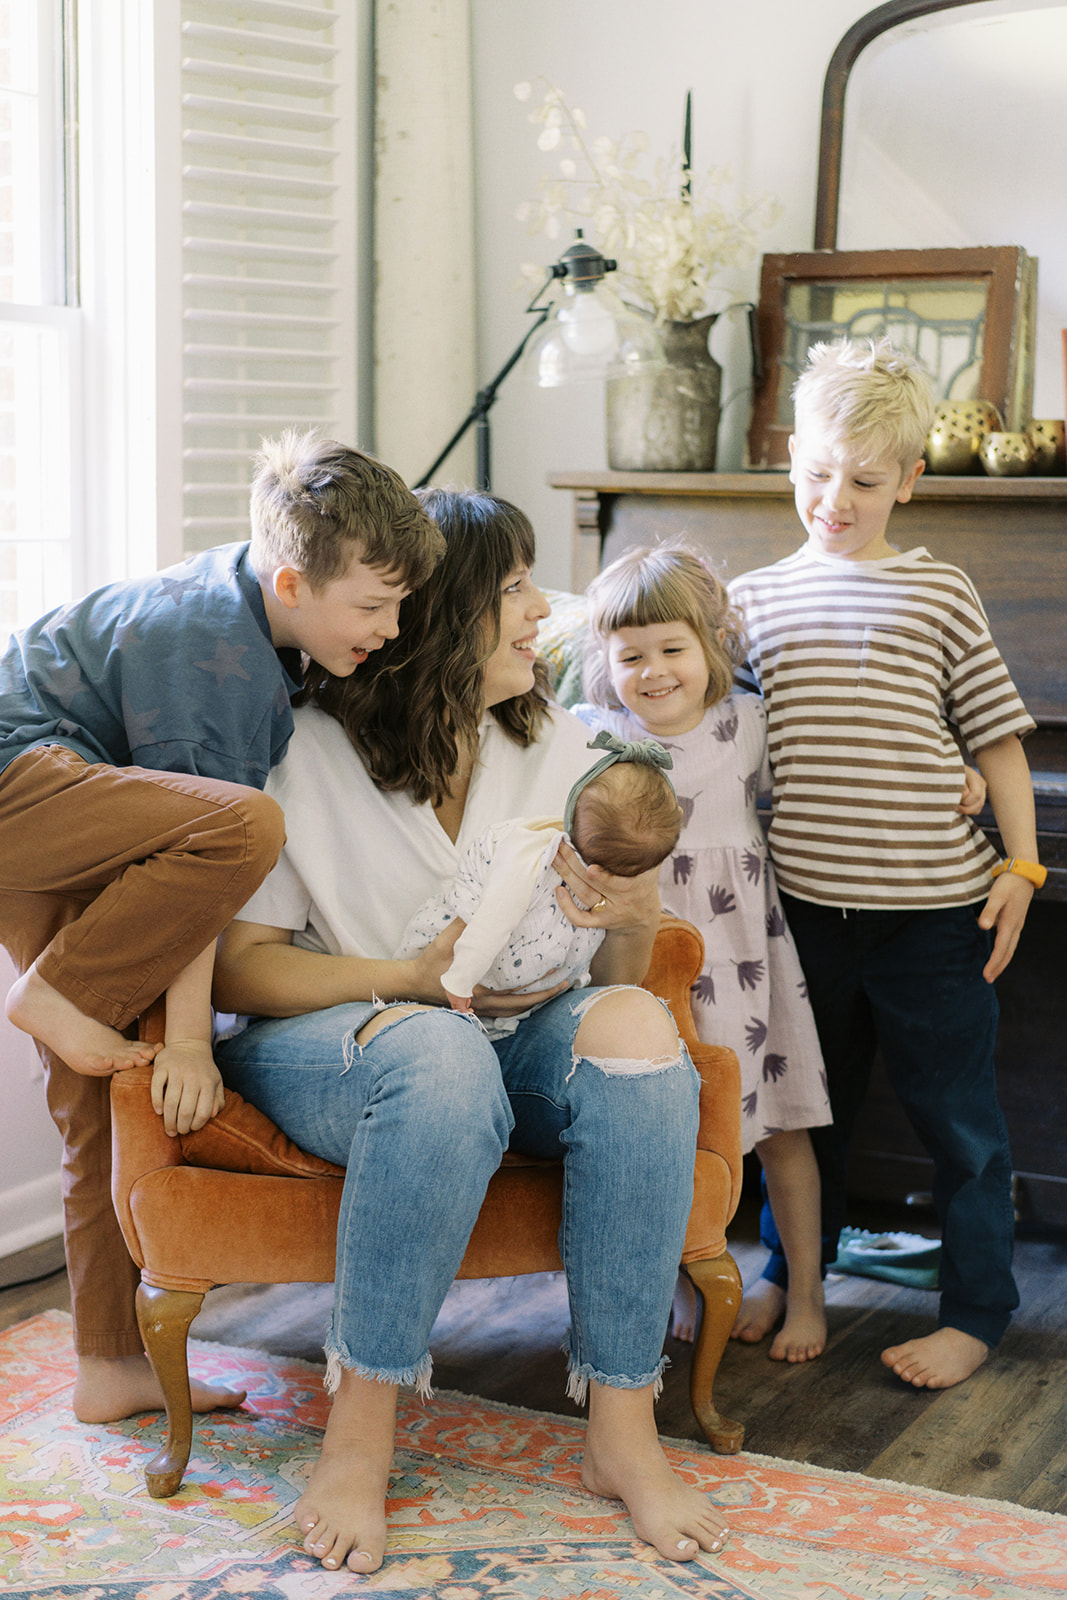 Brothers and sisters smile with mom at the new baby during an at-home lifestyle session